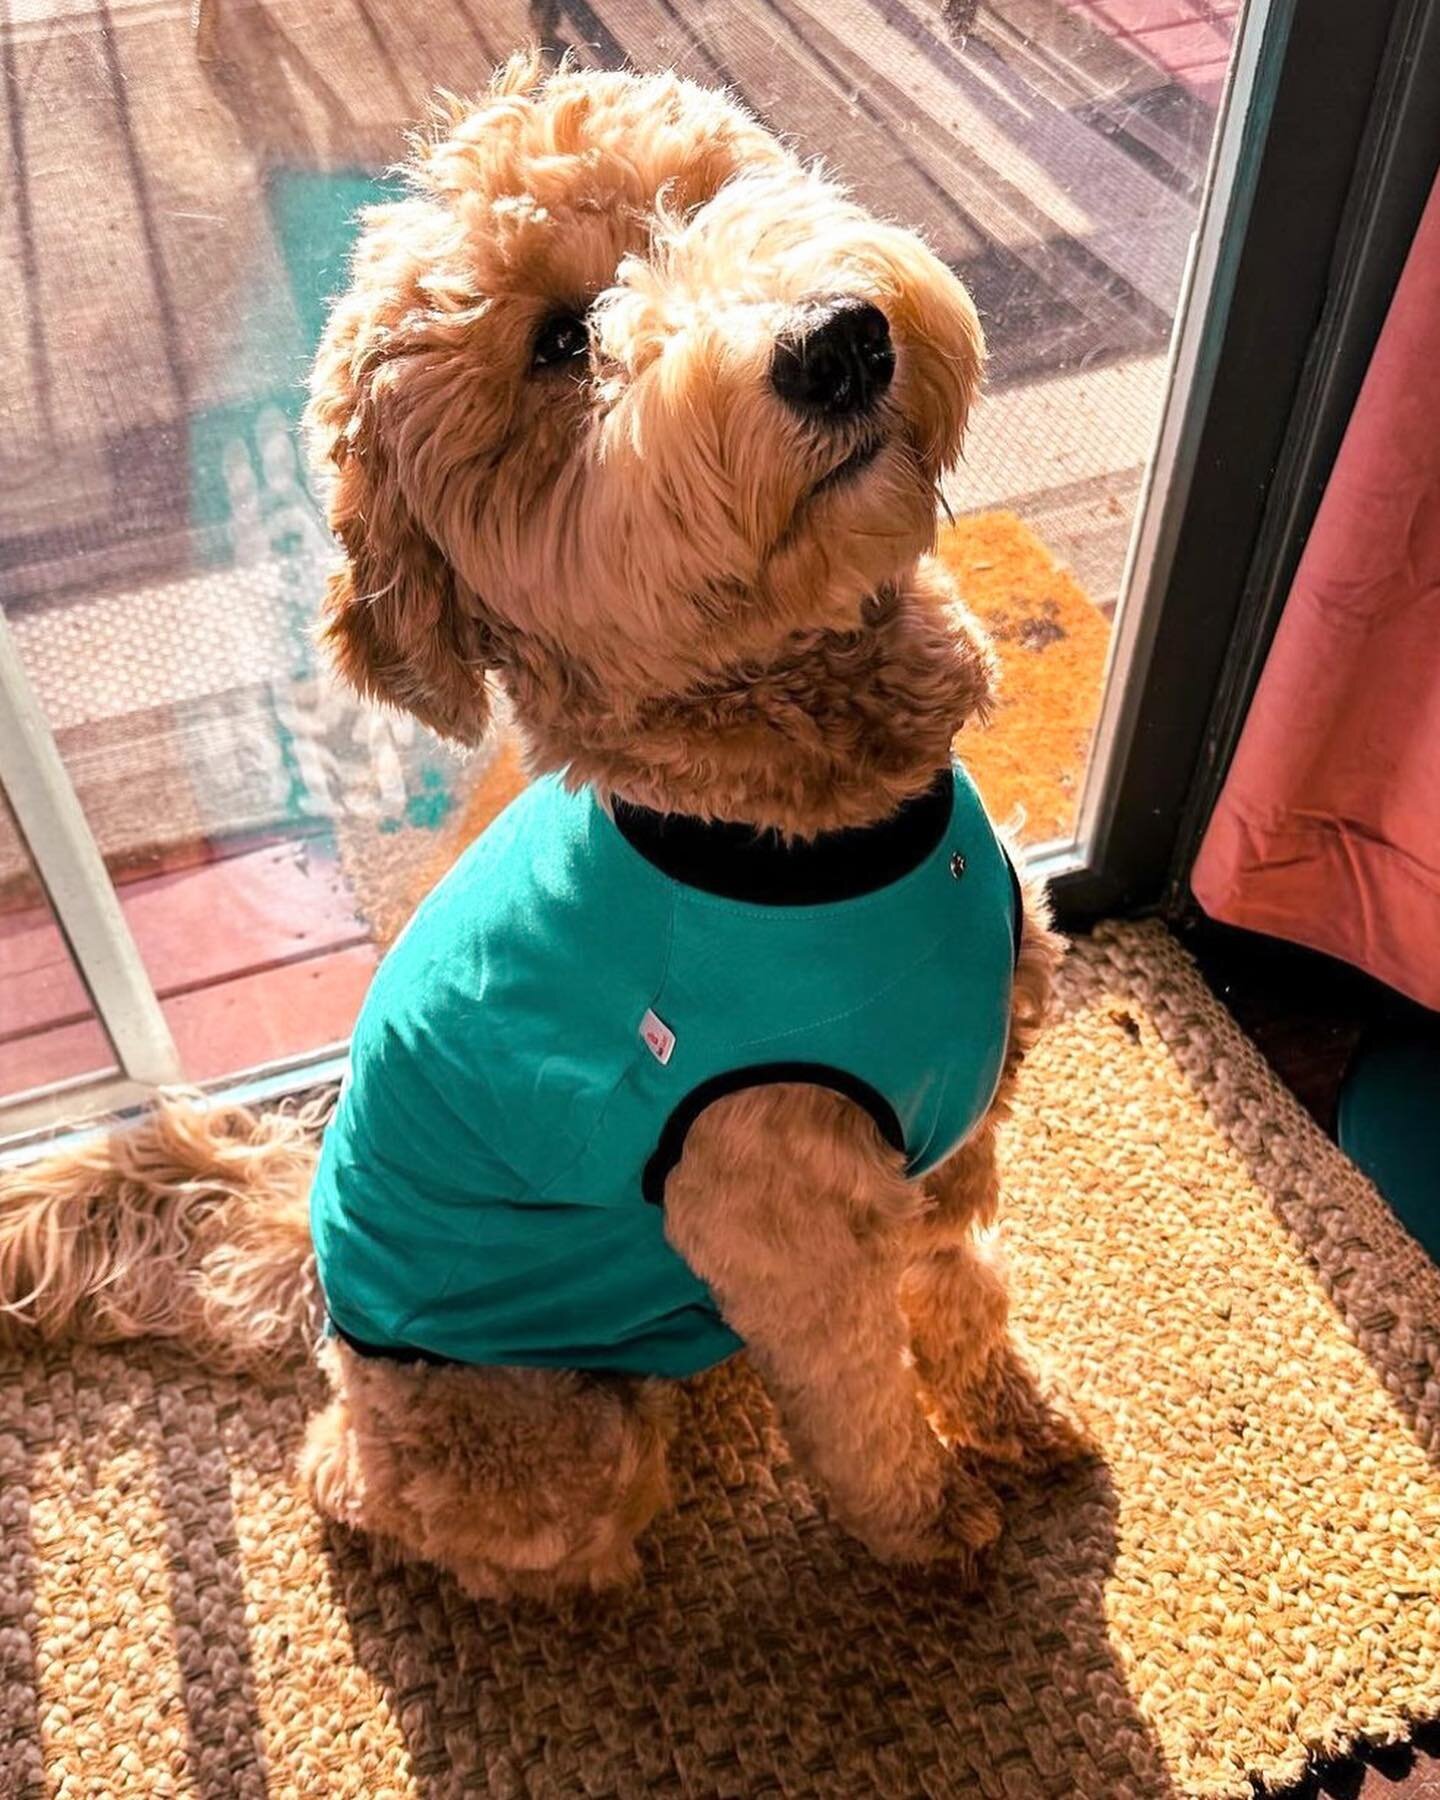 Meet Elsa the goldendoodle! Here&rsquo;s what she had to say about her BellyGuard&hellip; 🐶

&ldquo;Surgery can be ruff, but recovery can be made better with the right support. Instead of wearing an uncomfortable plastic cone, my parents got me this